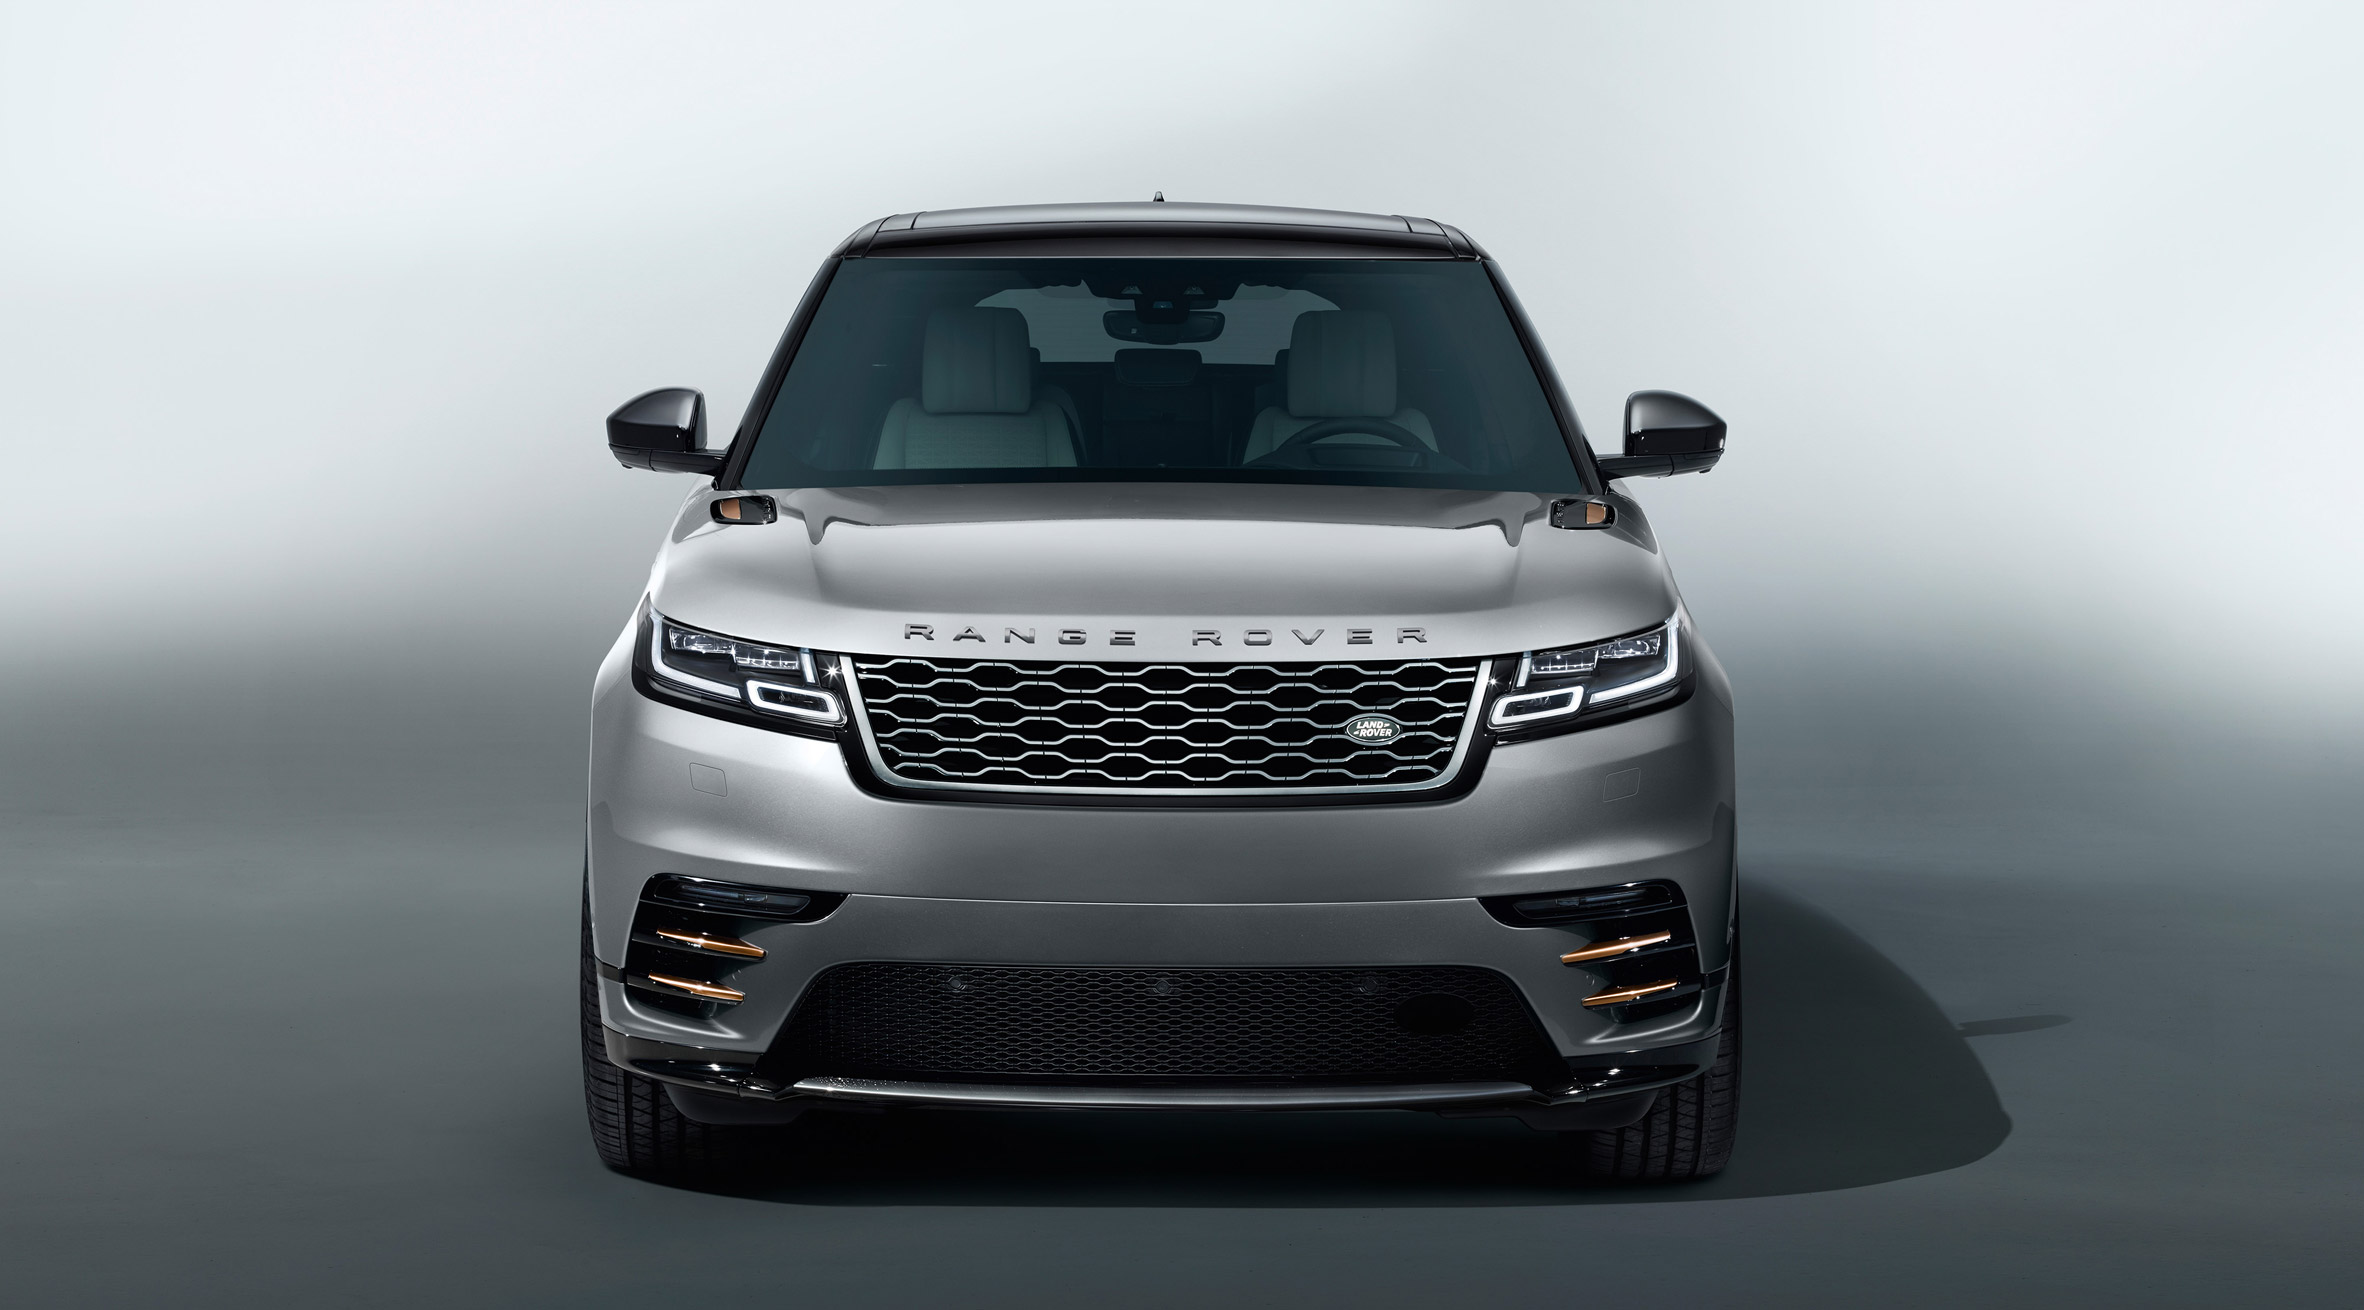 RANGE ROVER VELAR NAMED MOST BEAUTIFUL CAR IN THE WORLD